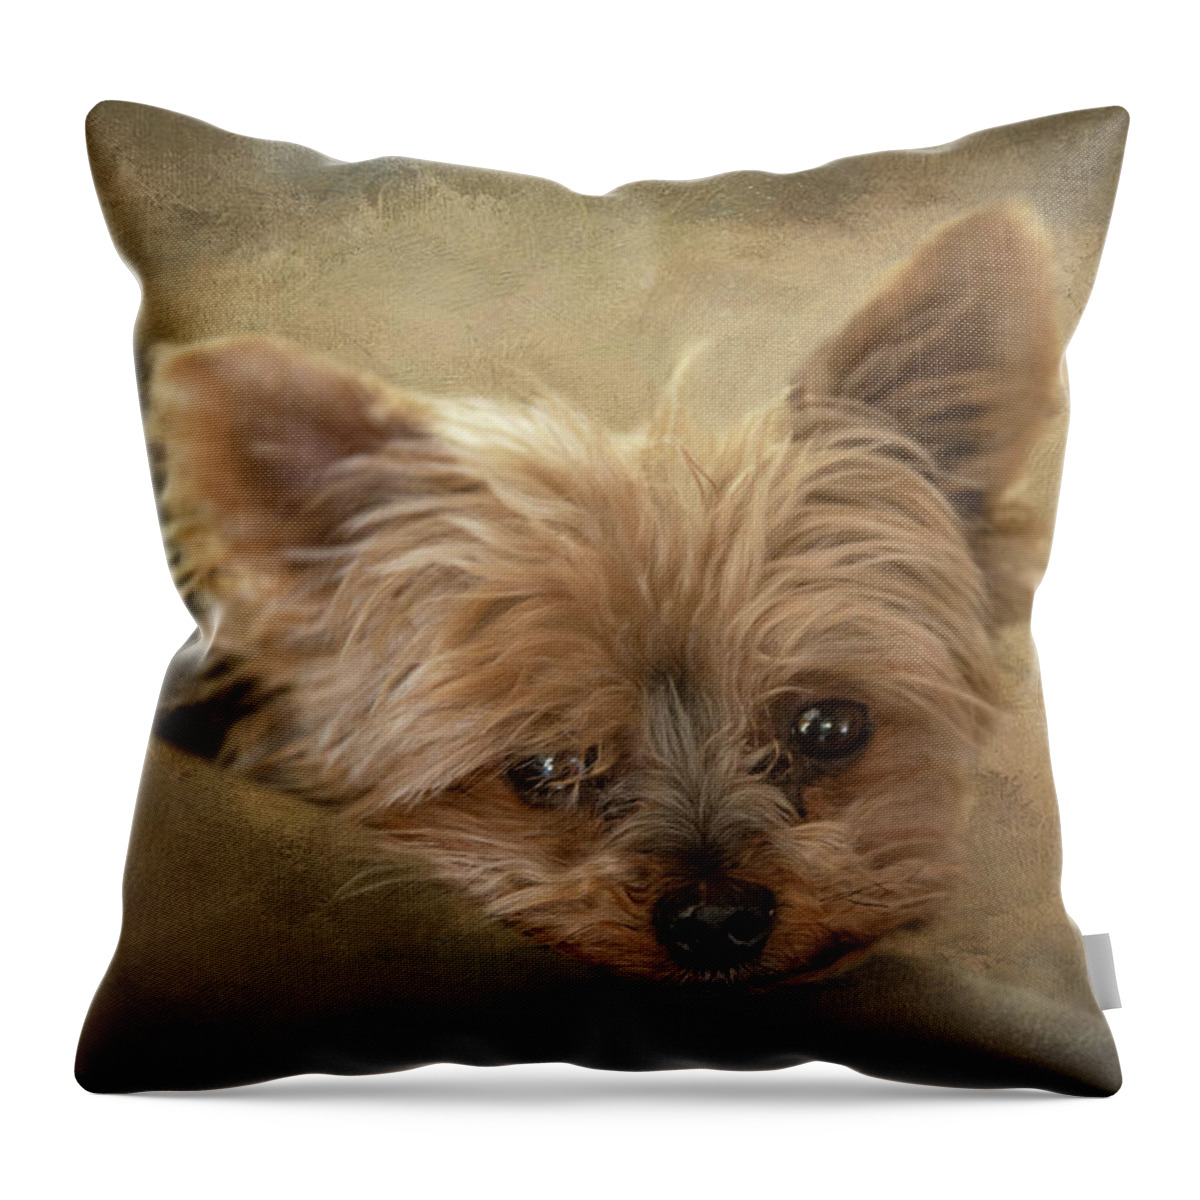 Yorkie Throw Pillow featuring the photograph Yorkshire Terrier by Elisabeth Lucas